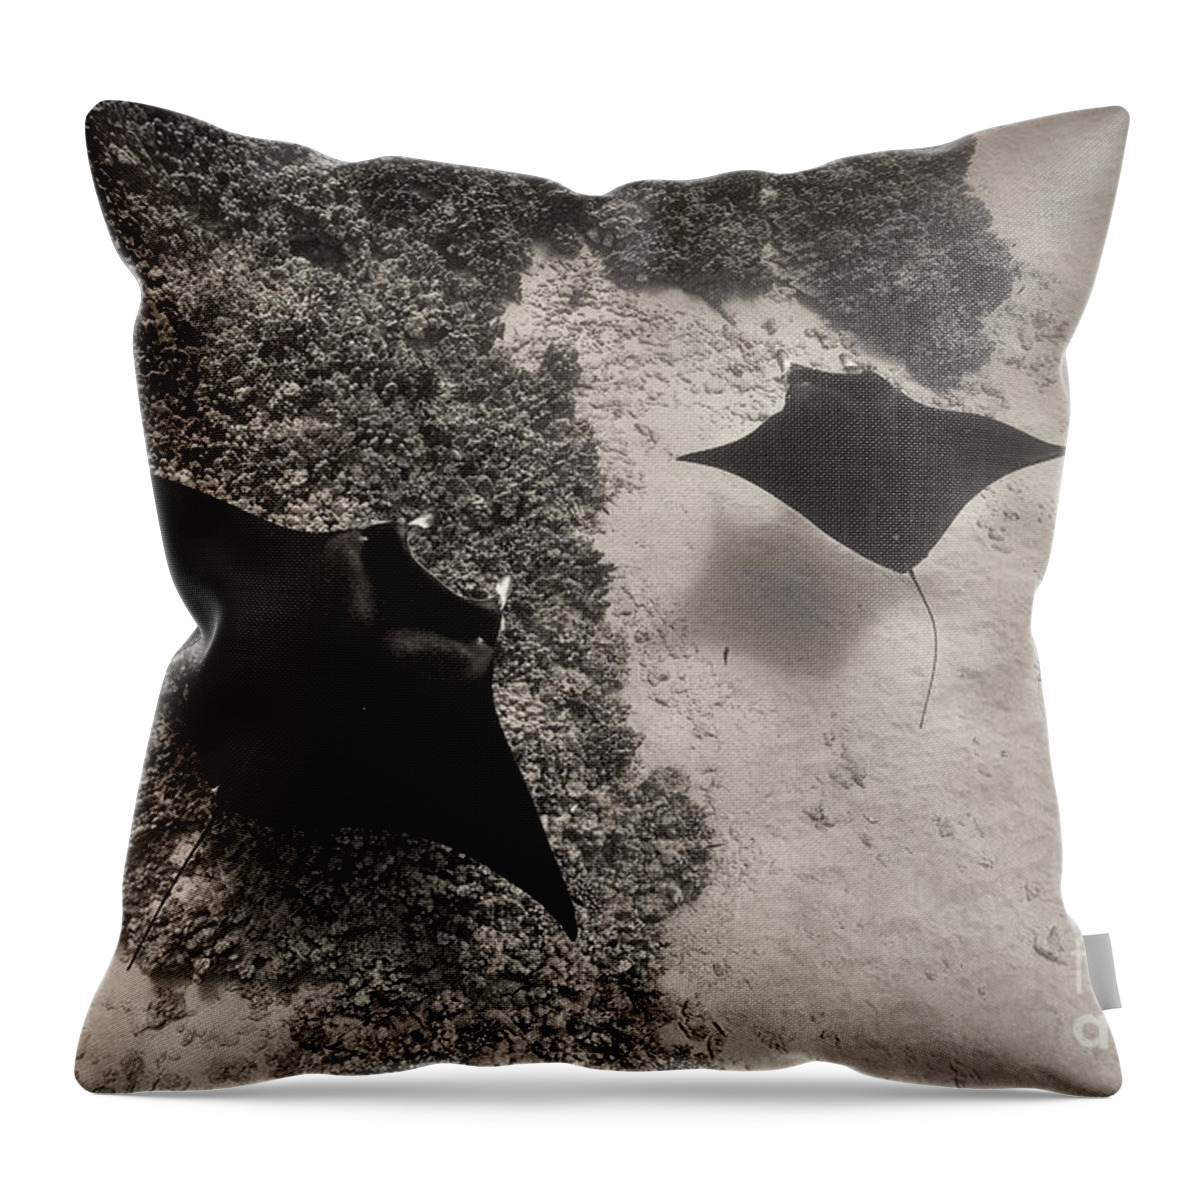 Manta Ray Throw Pillow featuring the photograph Over The Reef by Aaron Whittemore